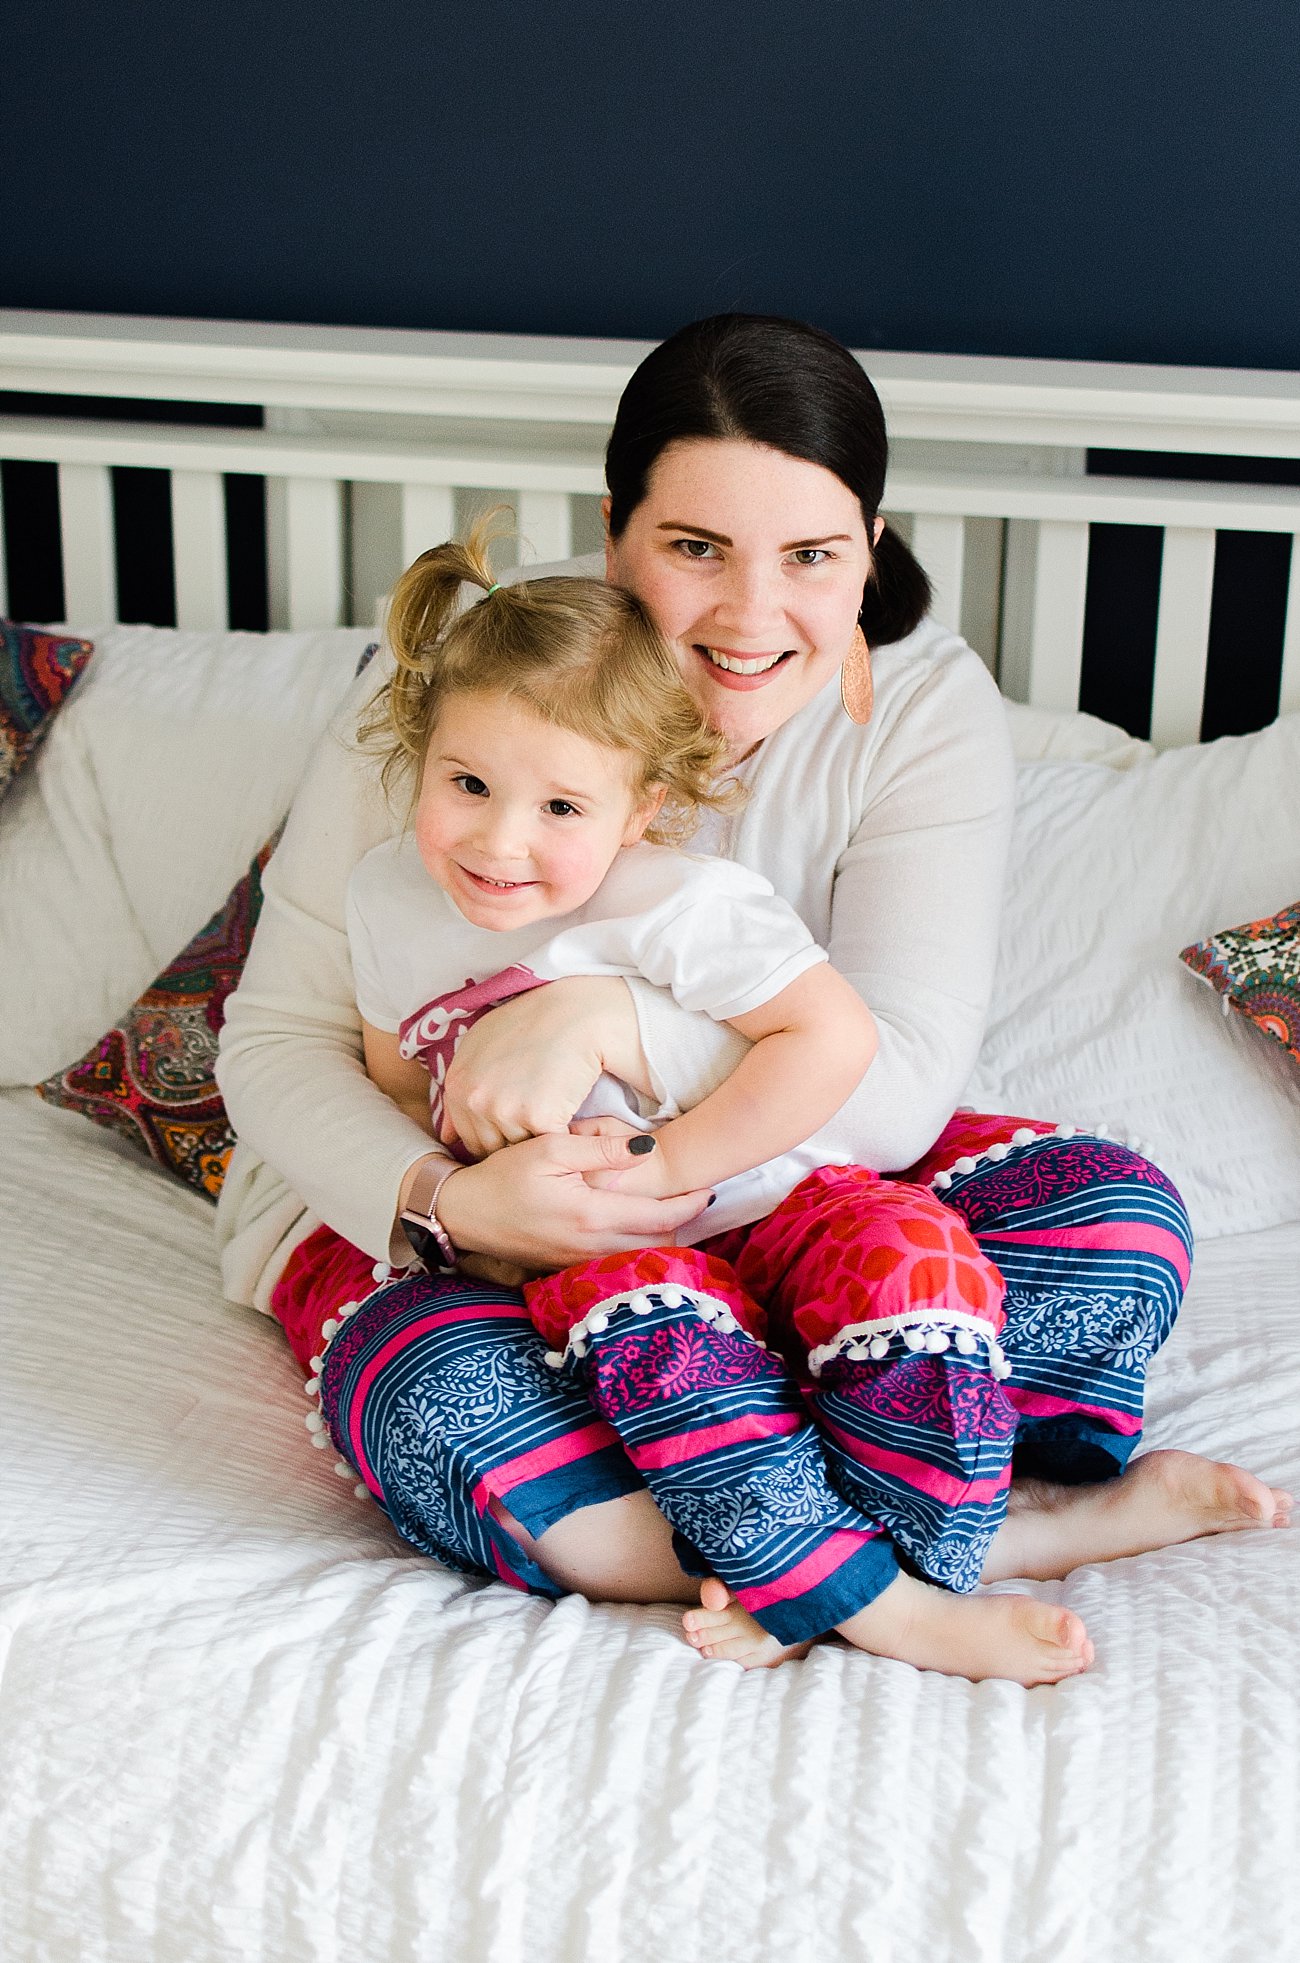 Sudara Goods Mommy & Me Punjammies - Ethical Fashion, Ethically Made Loungewear (4)